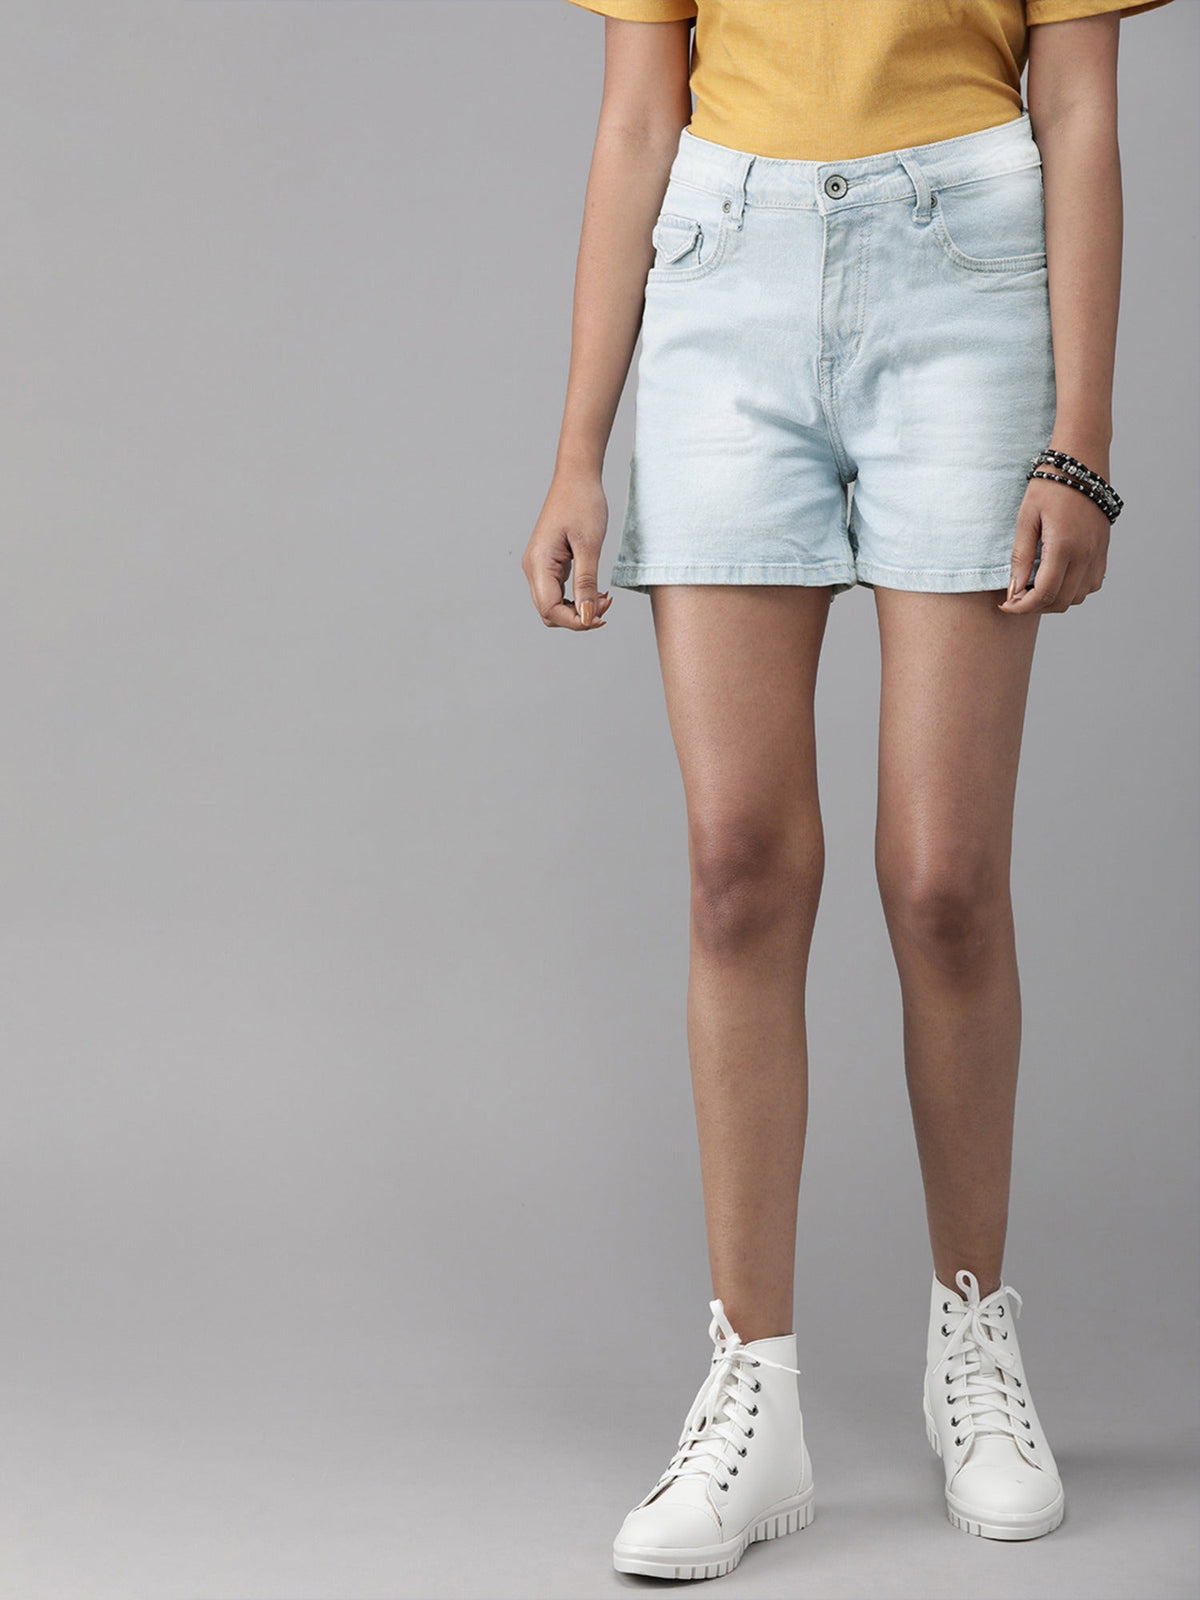 Roadster Women Blue Washed High-Rise Denim Shorts Price in India, Full  Specifications & Offers | DTashion.com